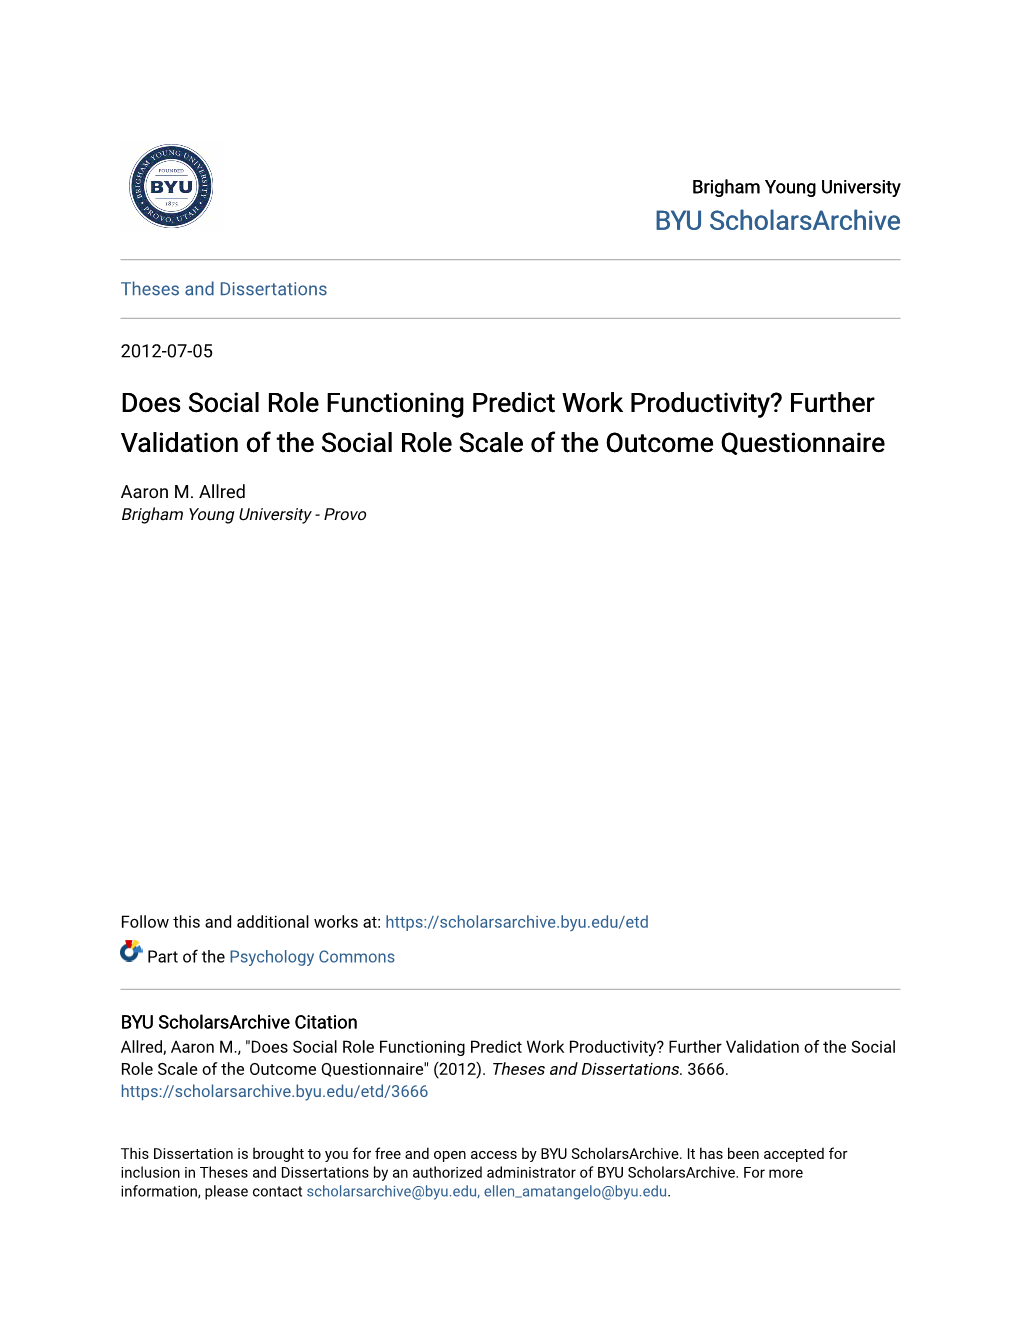 Does Social Role Functioning Predict Work Productivity? Further Validation of the Social Role Scale of the Outcome Questionnaire